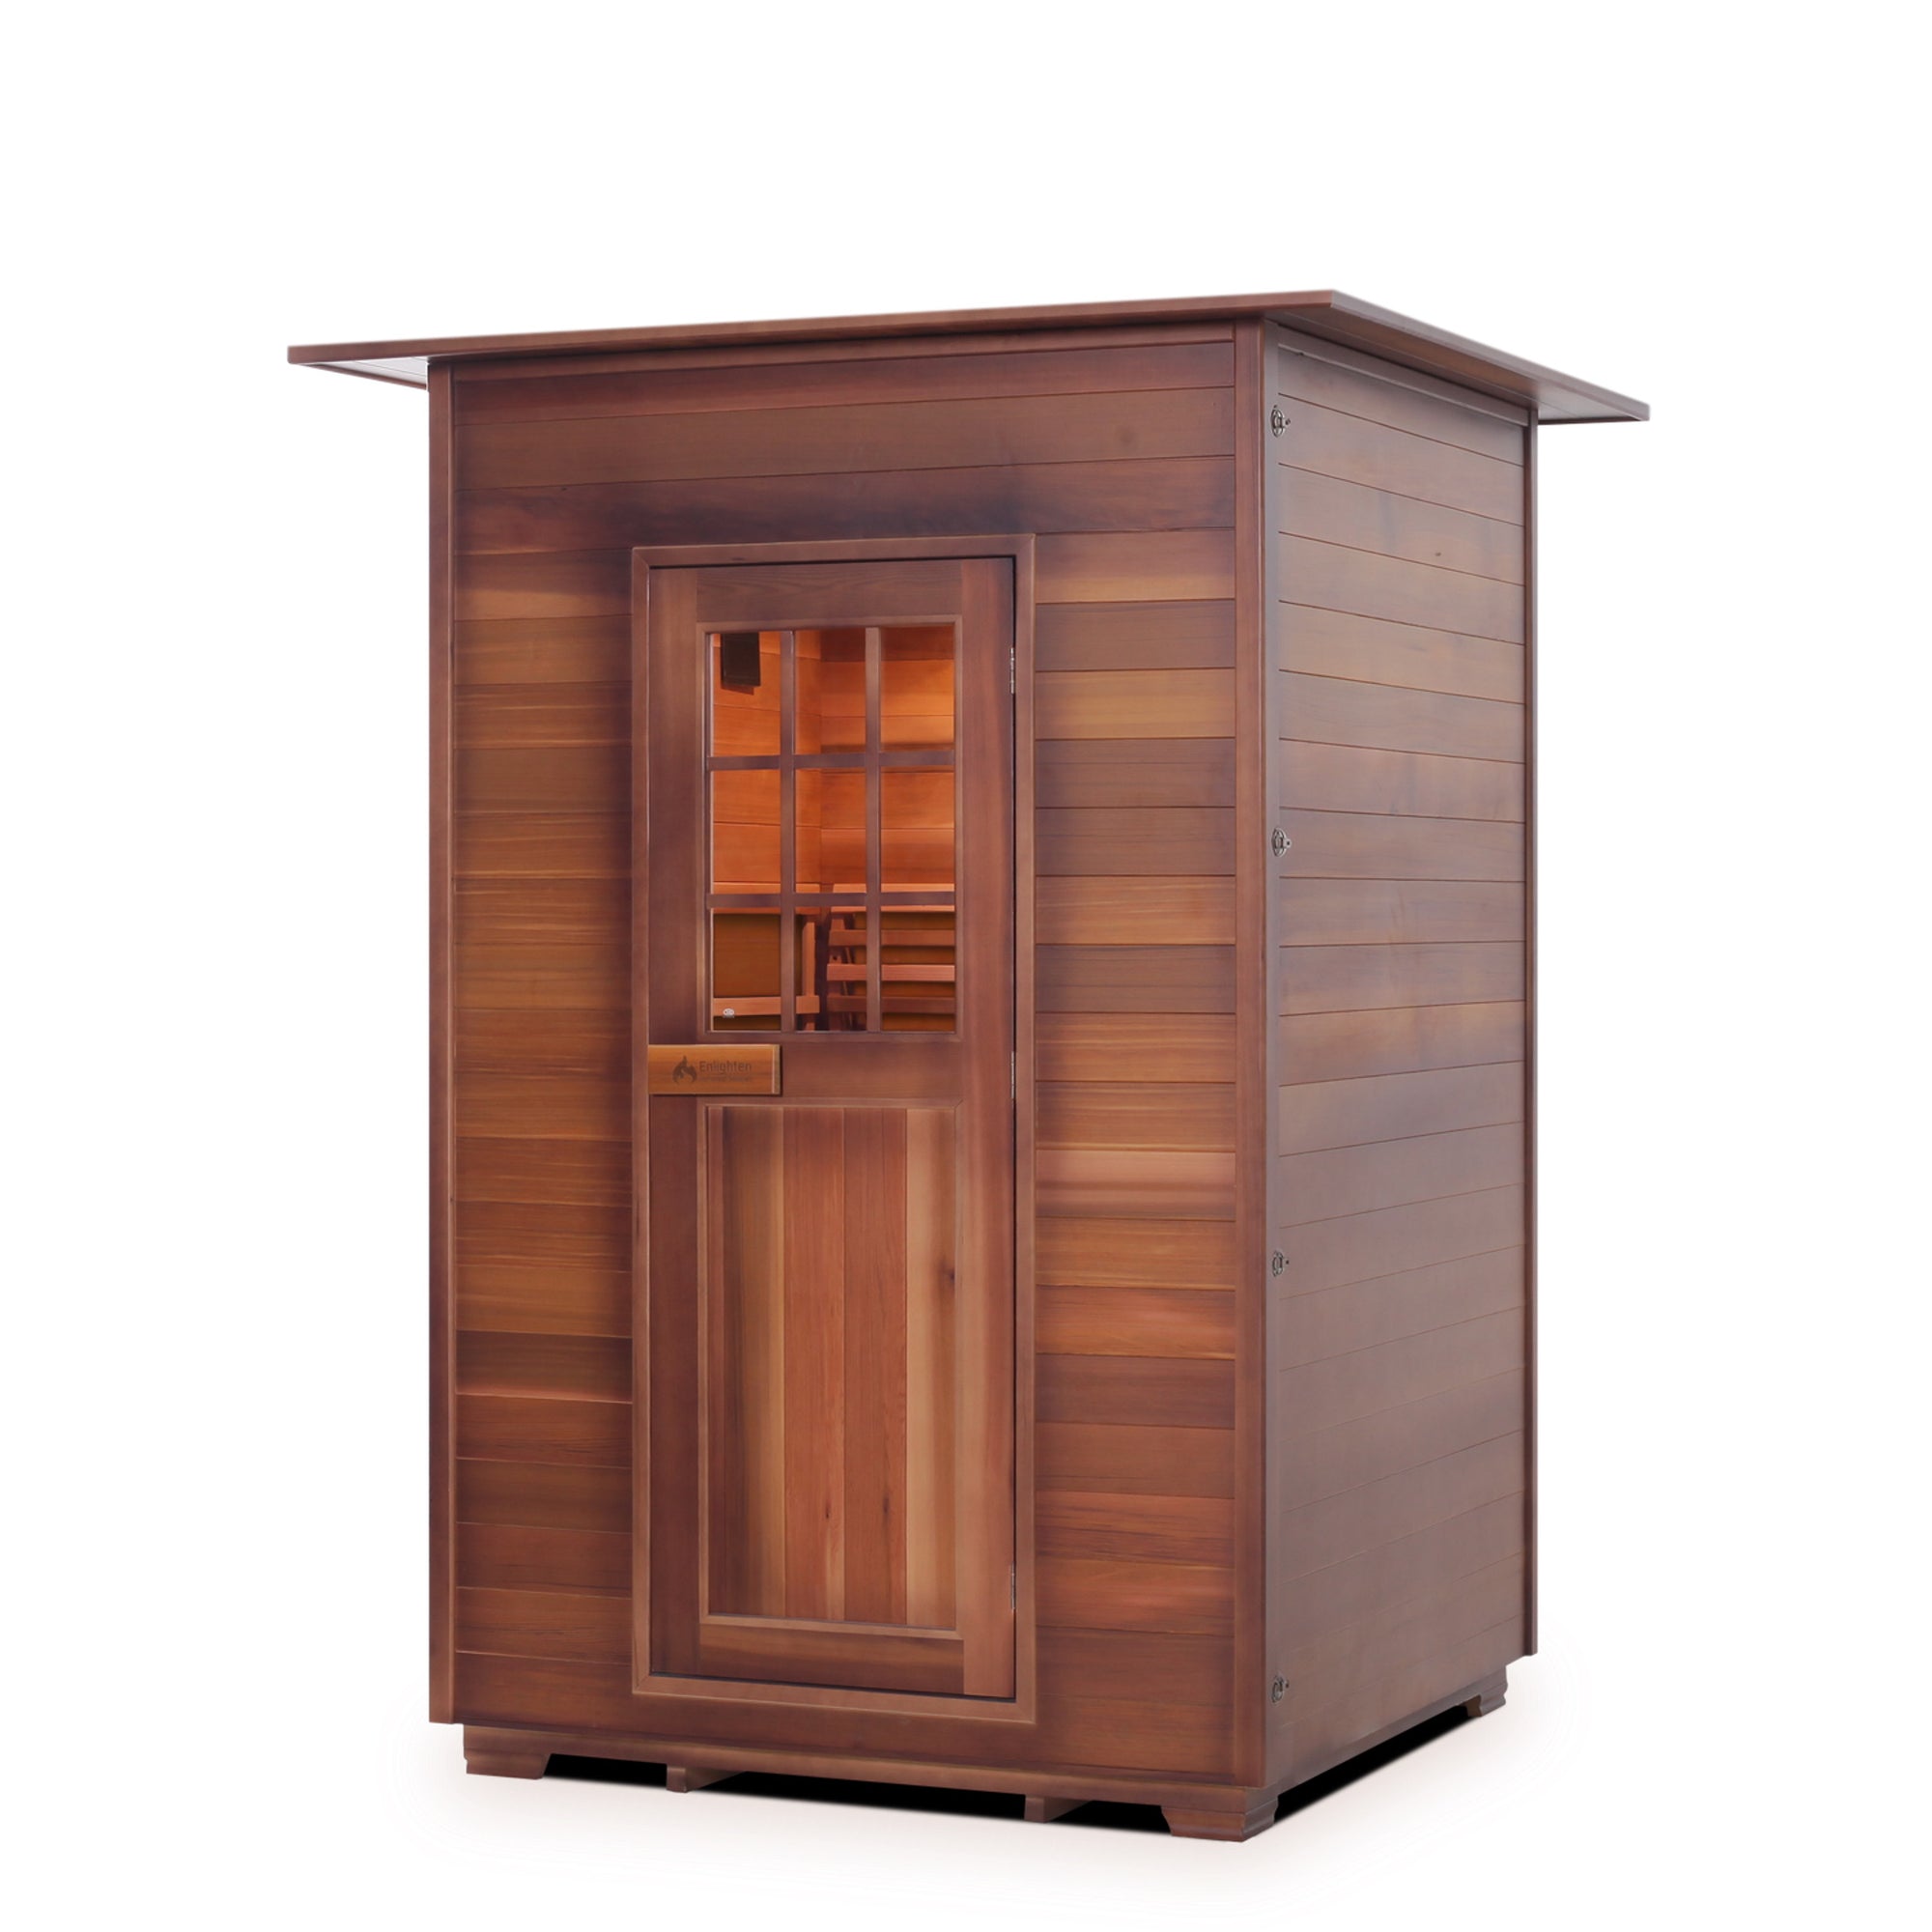 Enlighten sauna SaunaTerra Dry Traditional MoonLight 2 Person Indoor Canadian Red Cedar Wood Outside And Inside front view